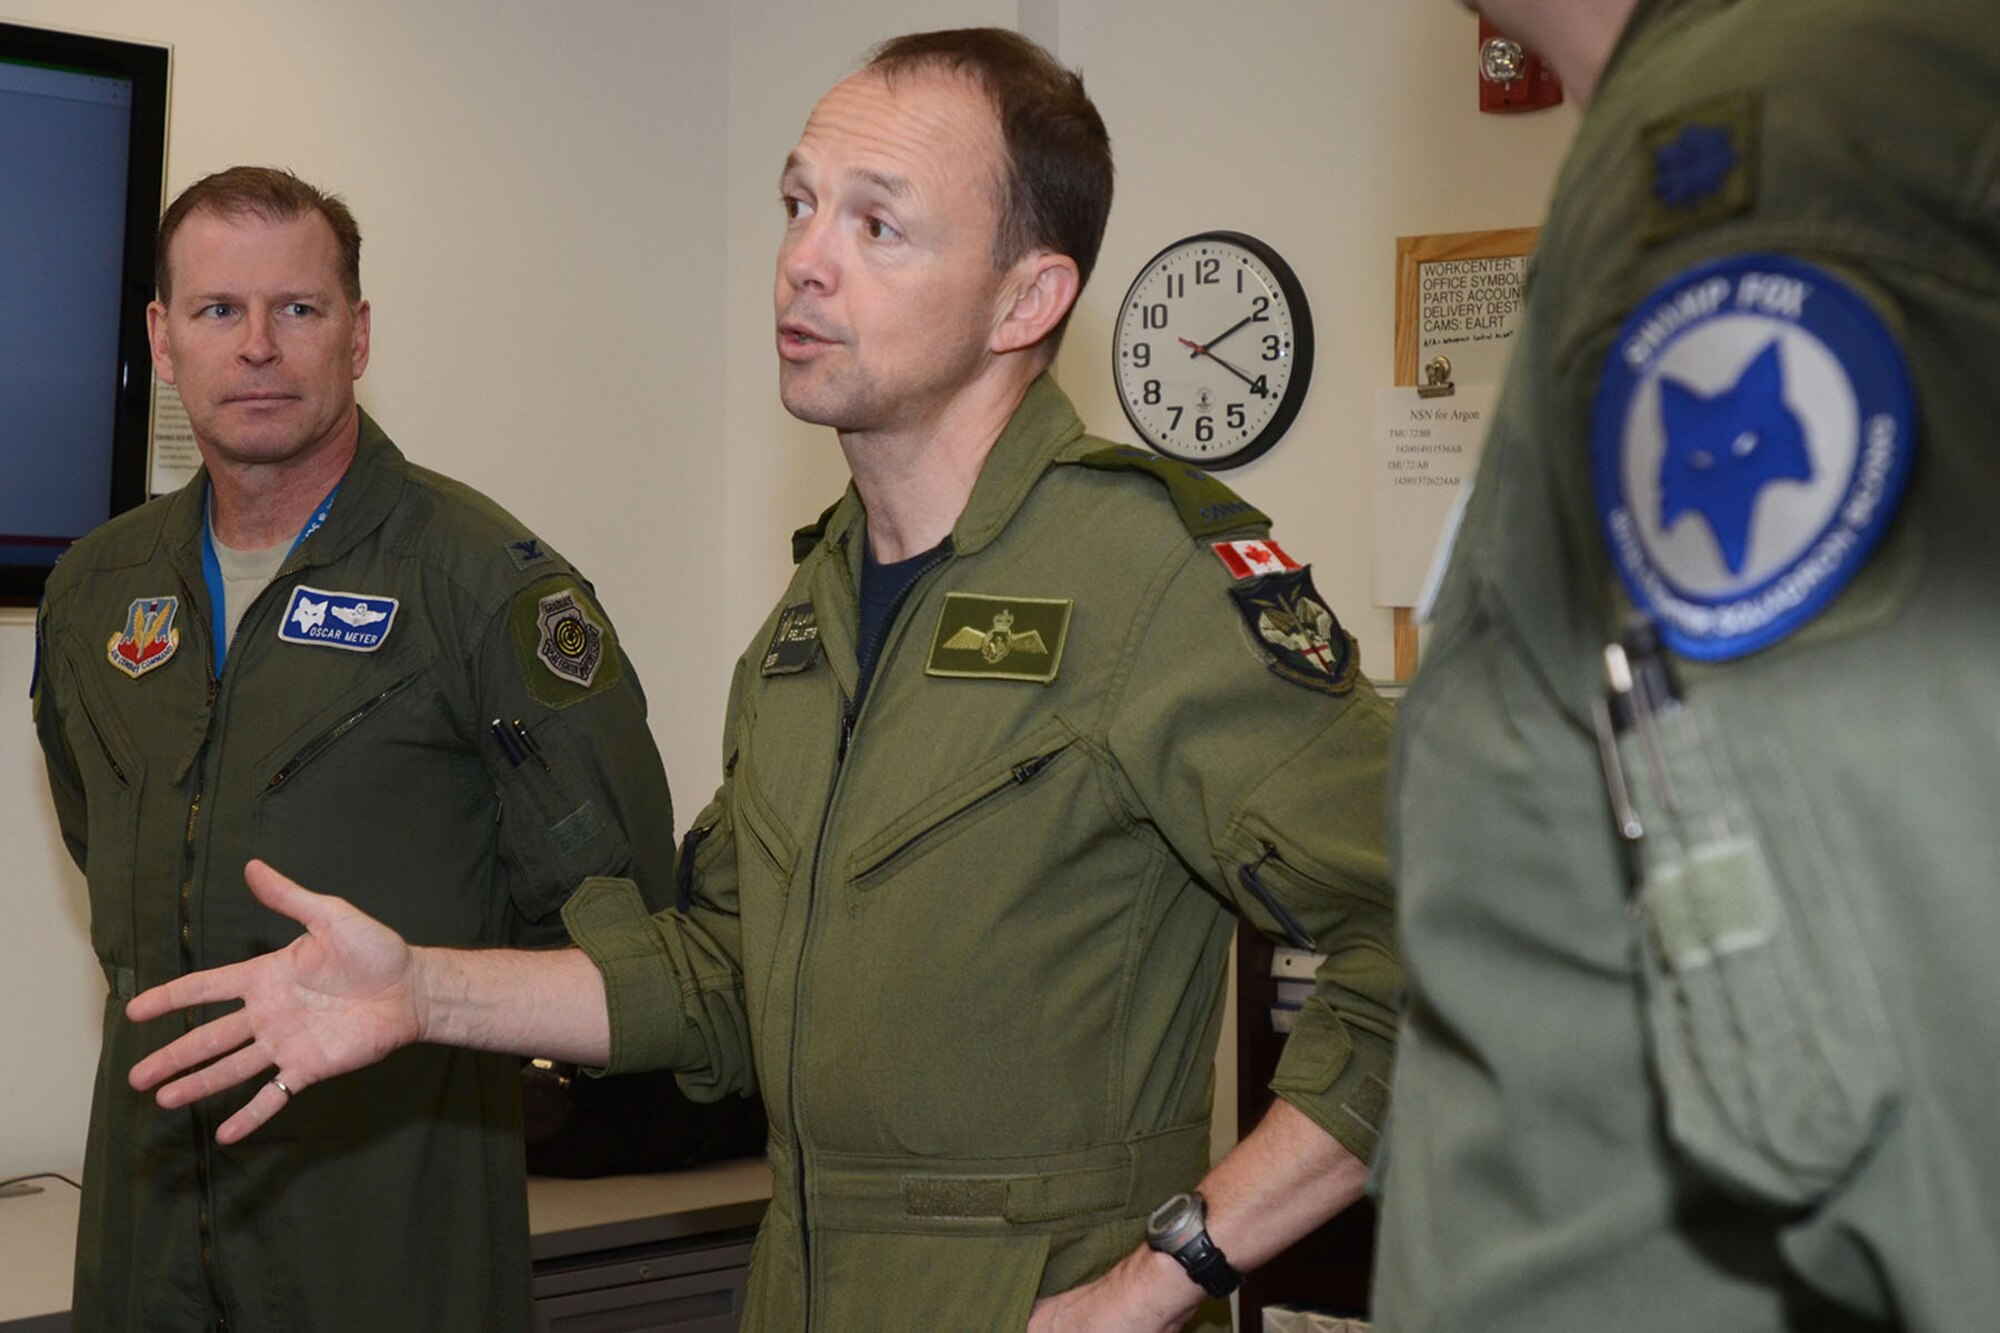 Canadian Forces Brig. Gen. Alain Pelletier, deputy commander Continental United States NORAD Region, center, speaks with personnel assigned to the South Carolina Air National Guard's 169th Fighter Wing at McEntire Joint National Guard Station,  Feb. 29 2016. During his visit, he spoke to wing leadership about its homeland defense mission and the relationship it has with the NORAD air component as it is tasked through CONR to ensure North American airspace control. The 169th FW has provided support for numerous CONR training and air defense events in past years. Brig. Gen. Pelletier also received an orientation flight on a SCANG F-16 Fighting Falcon fighter jet and a tour of the installation. (U.S. National Guard photo by Airman 1st Class Megan Floyd)